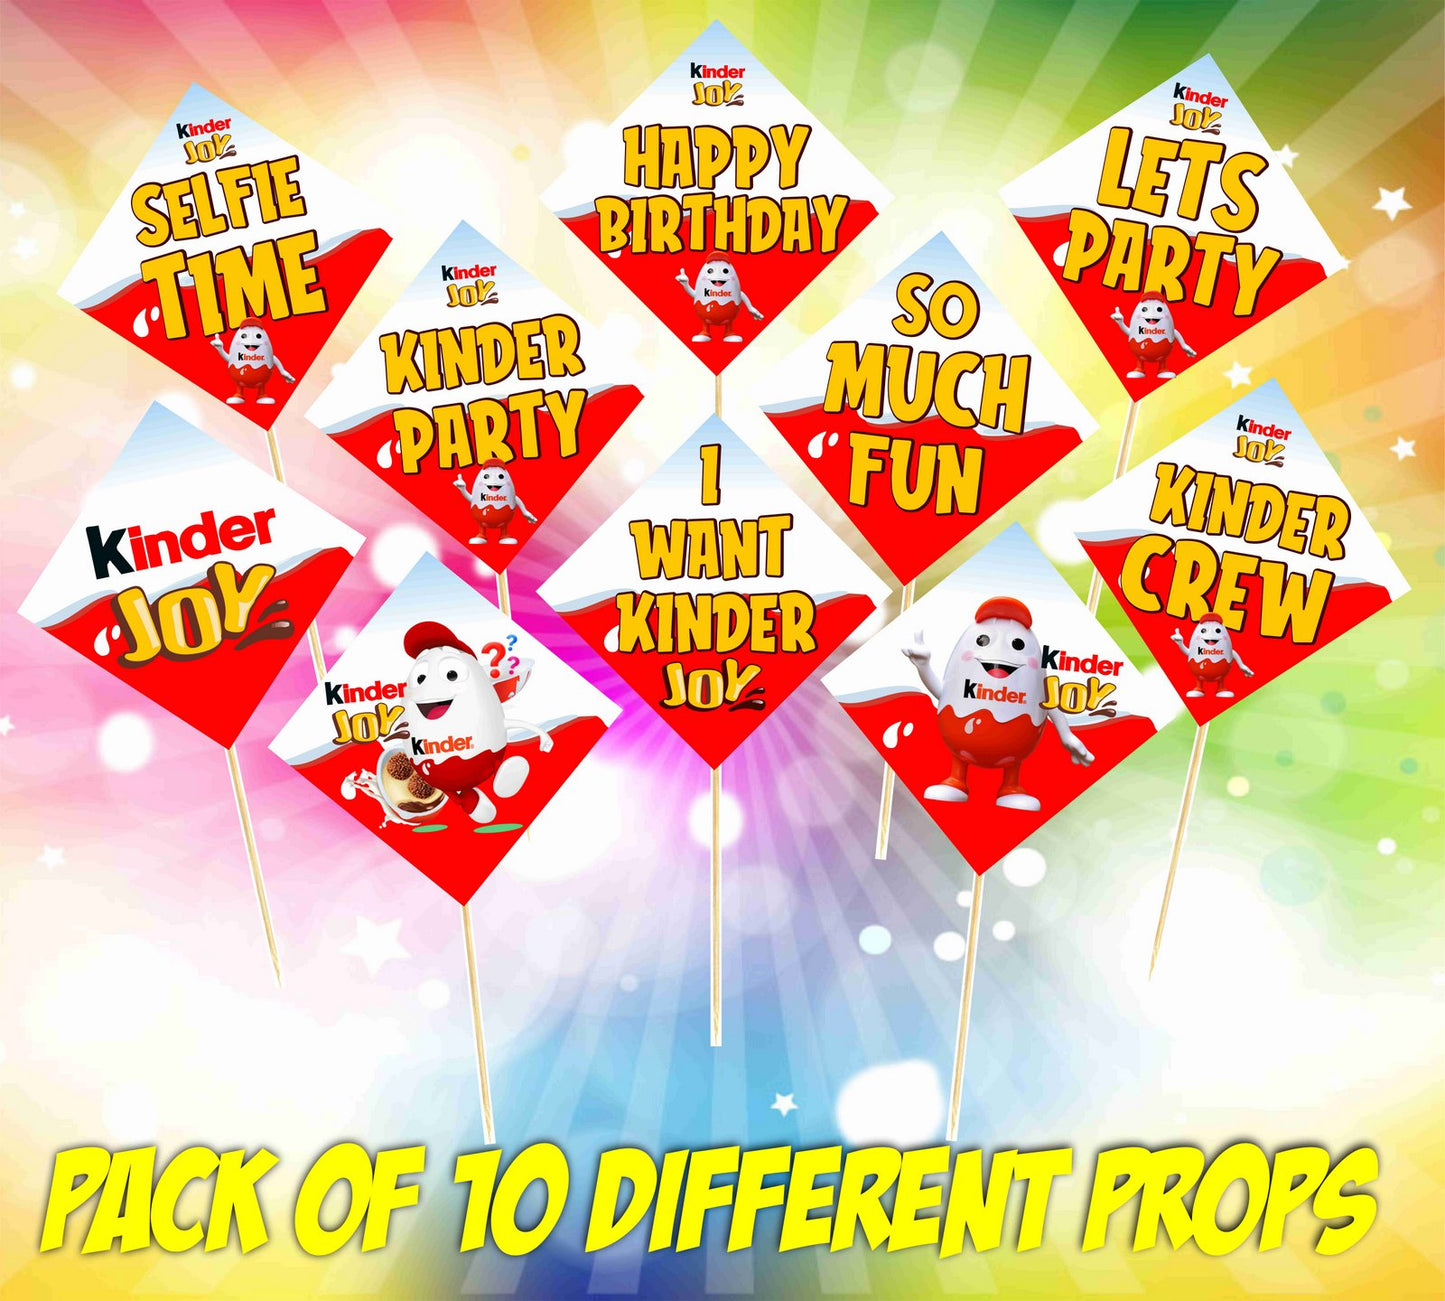 KinderJoy Theme Birthday Photo Booth Party Props Theme Birthday Party Decoration, Birthday Photo Booth Party Item for Adults and Kids